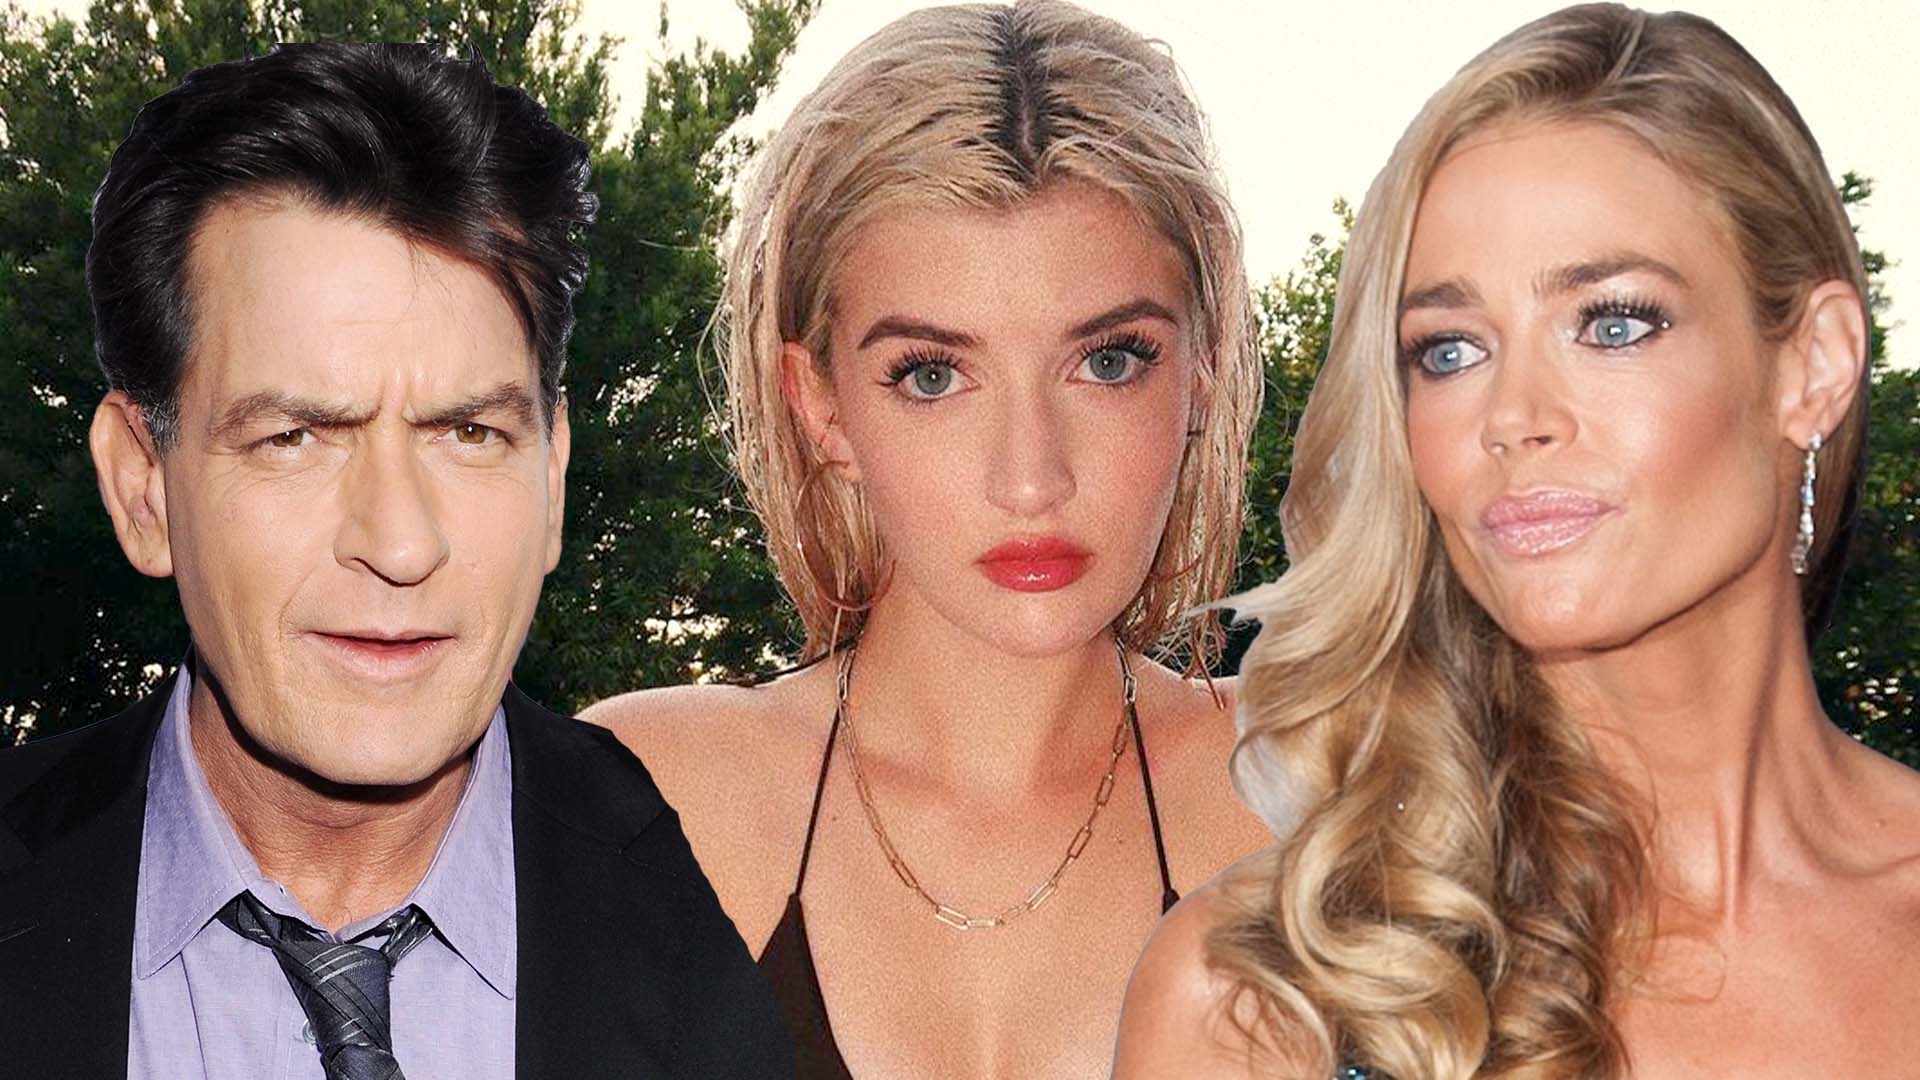 Charlie Sheen and Denise Richards Daughter Sami Shares Her Routine as a Sex Worker Entertainment Tonight pic